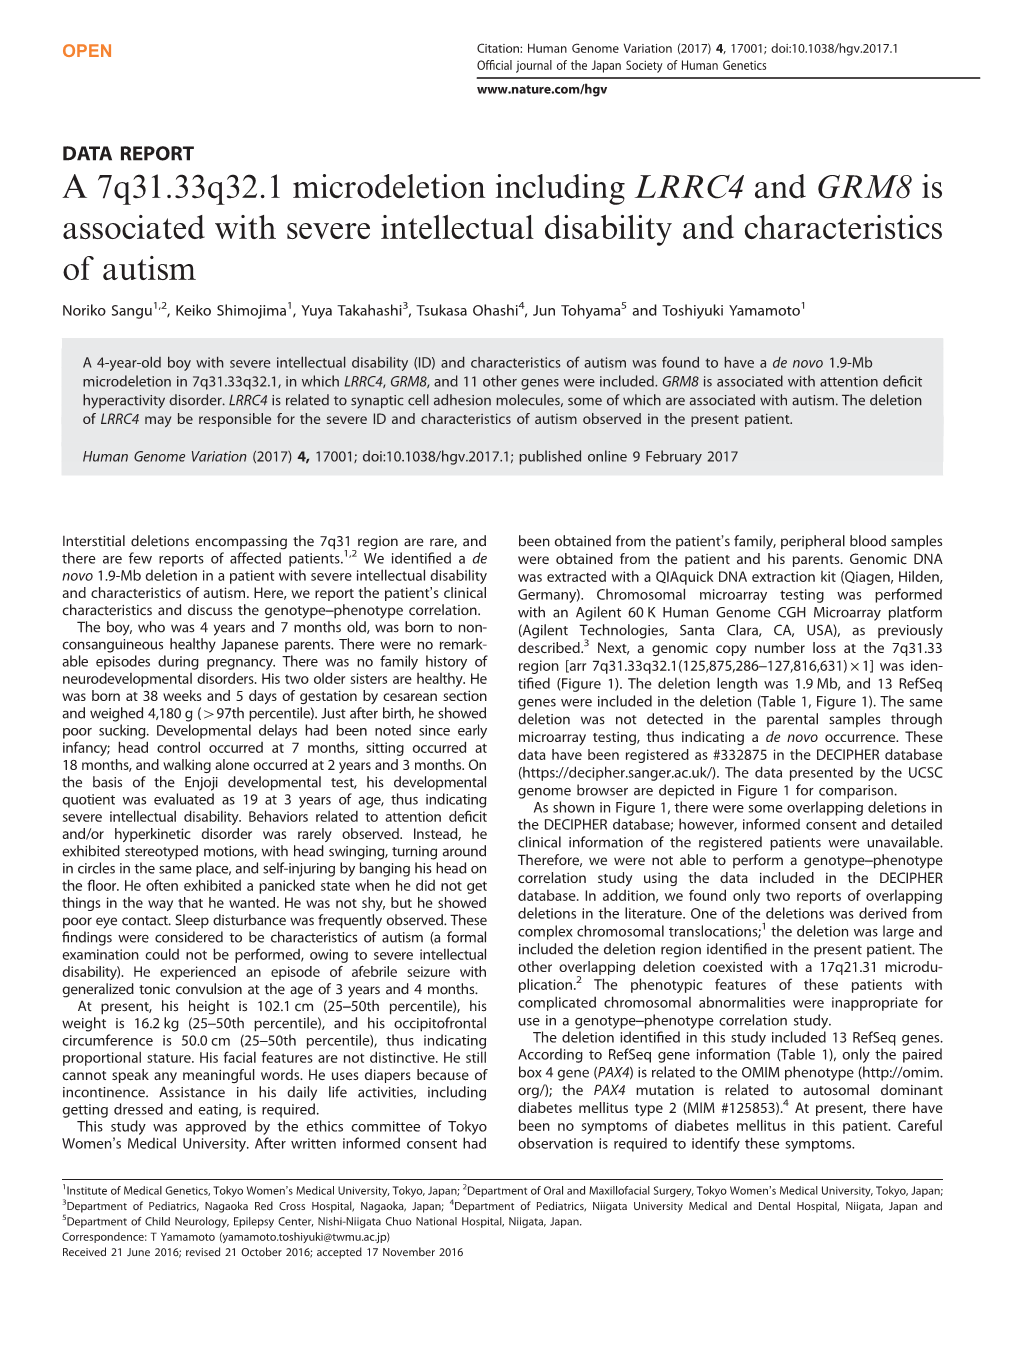 A 7Q31.33Q32.1 Microdeletion Including LRRC4 and GRM8 Is Associated with Severe Intellectual Disability and Characteristics of Autism